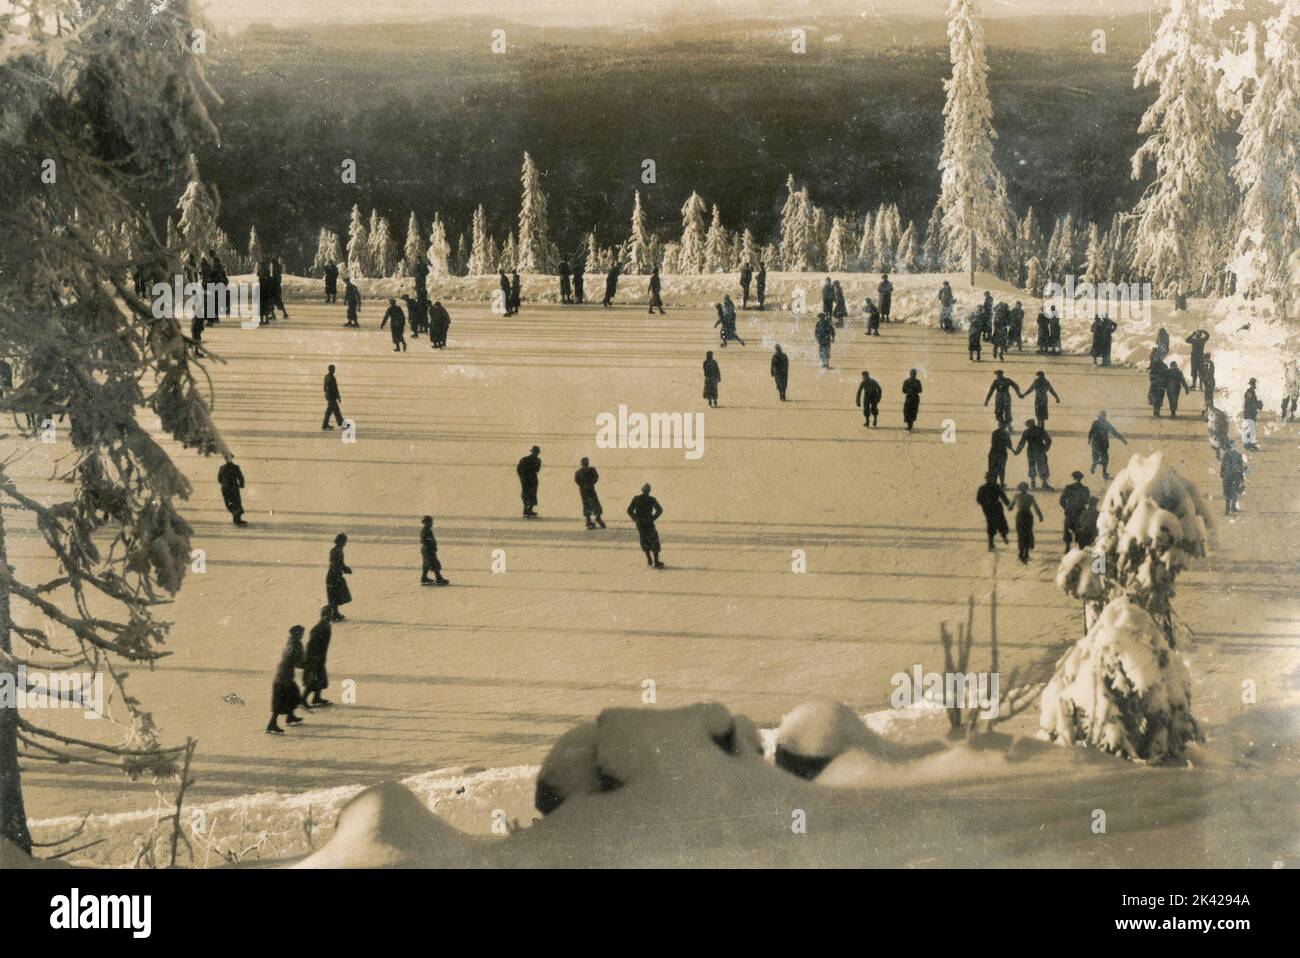 People ice skating at the Tryvann stadion, Oslo, Norway 1940s Stock Photo